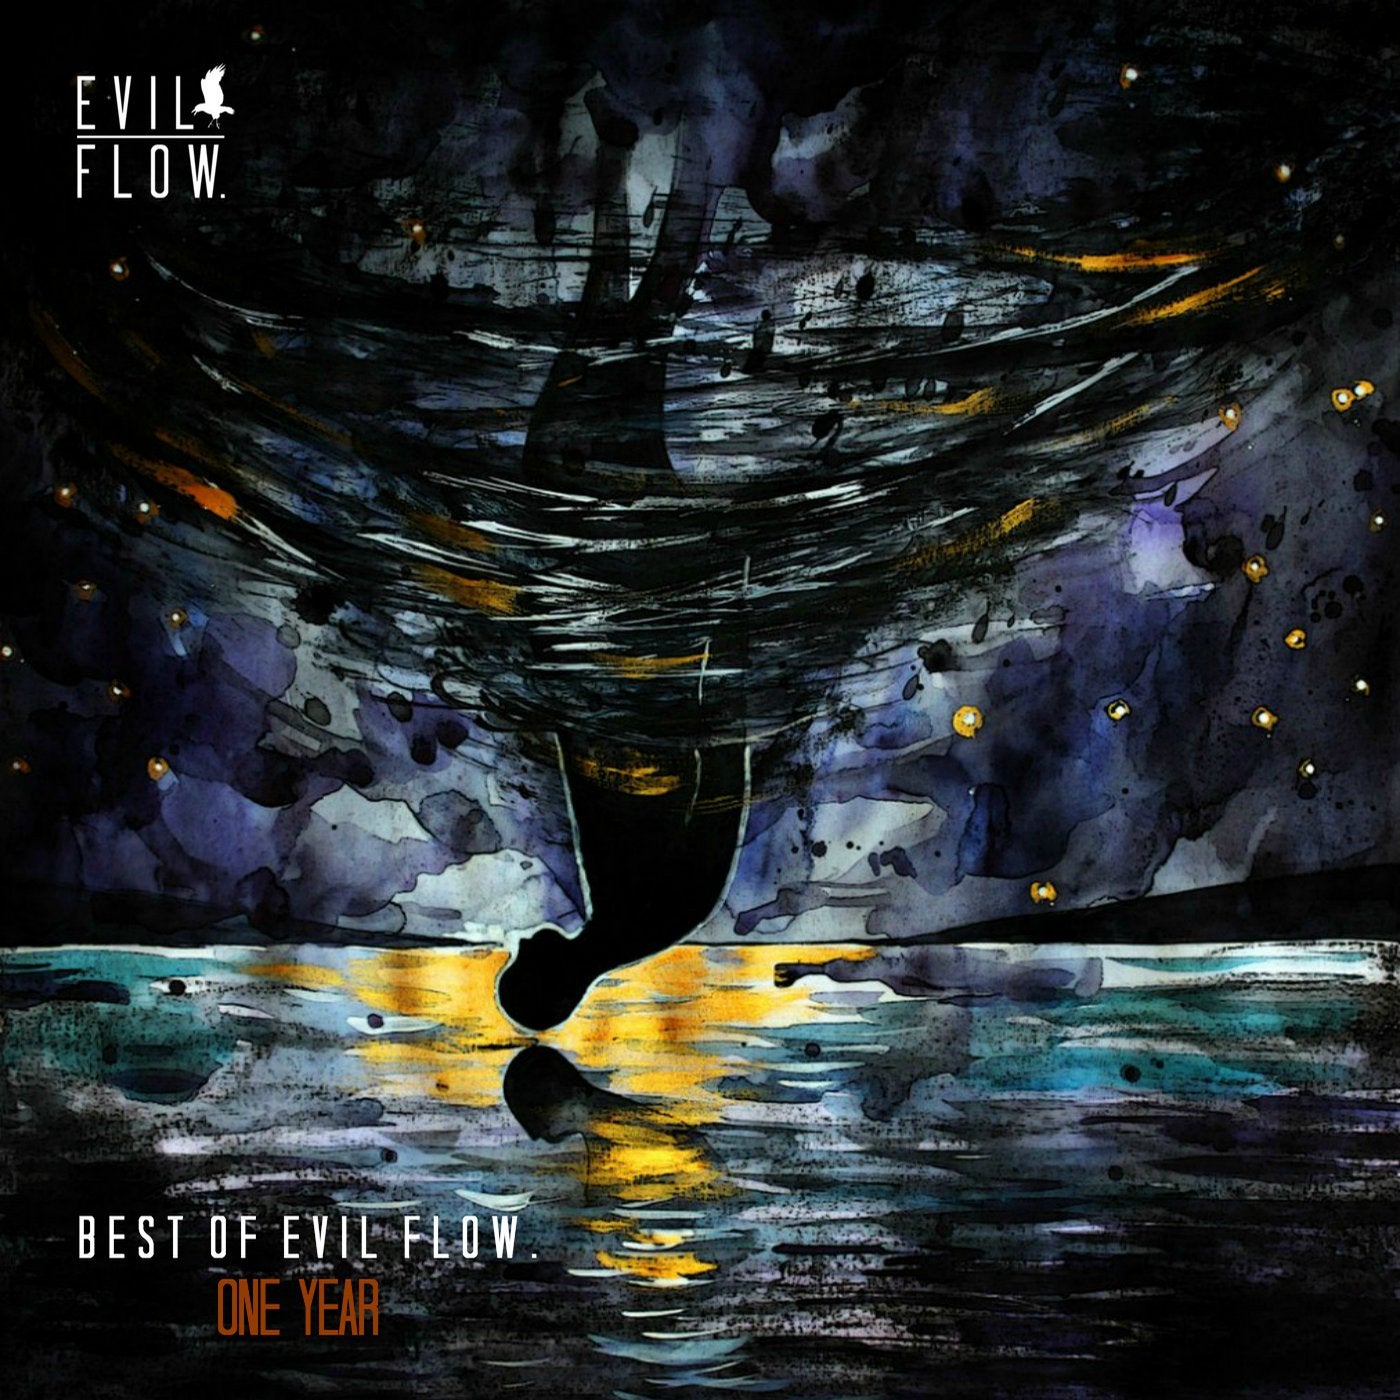 Best Of Evil Flow. One Year